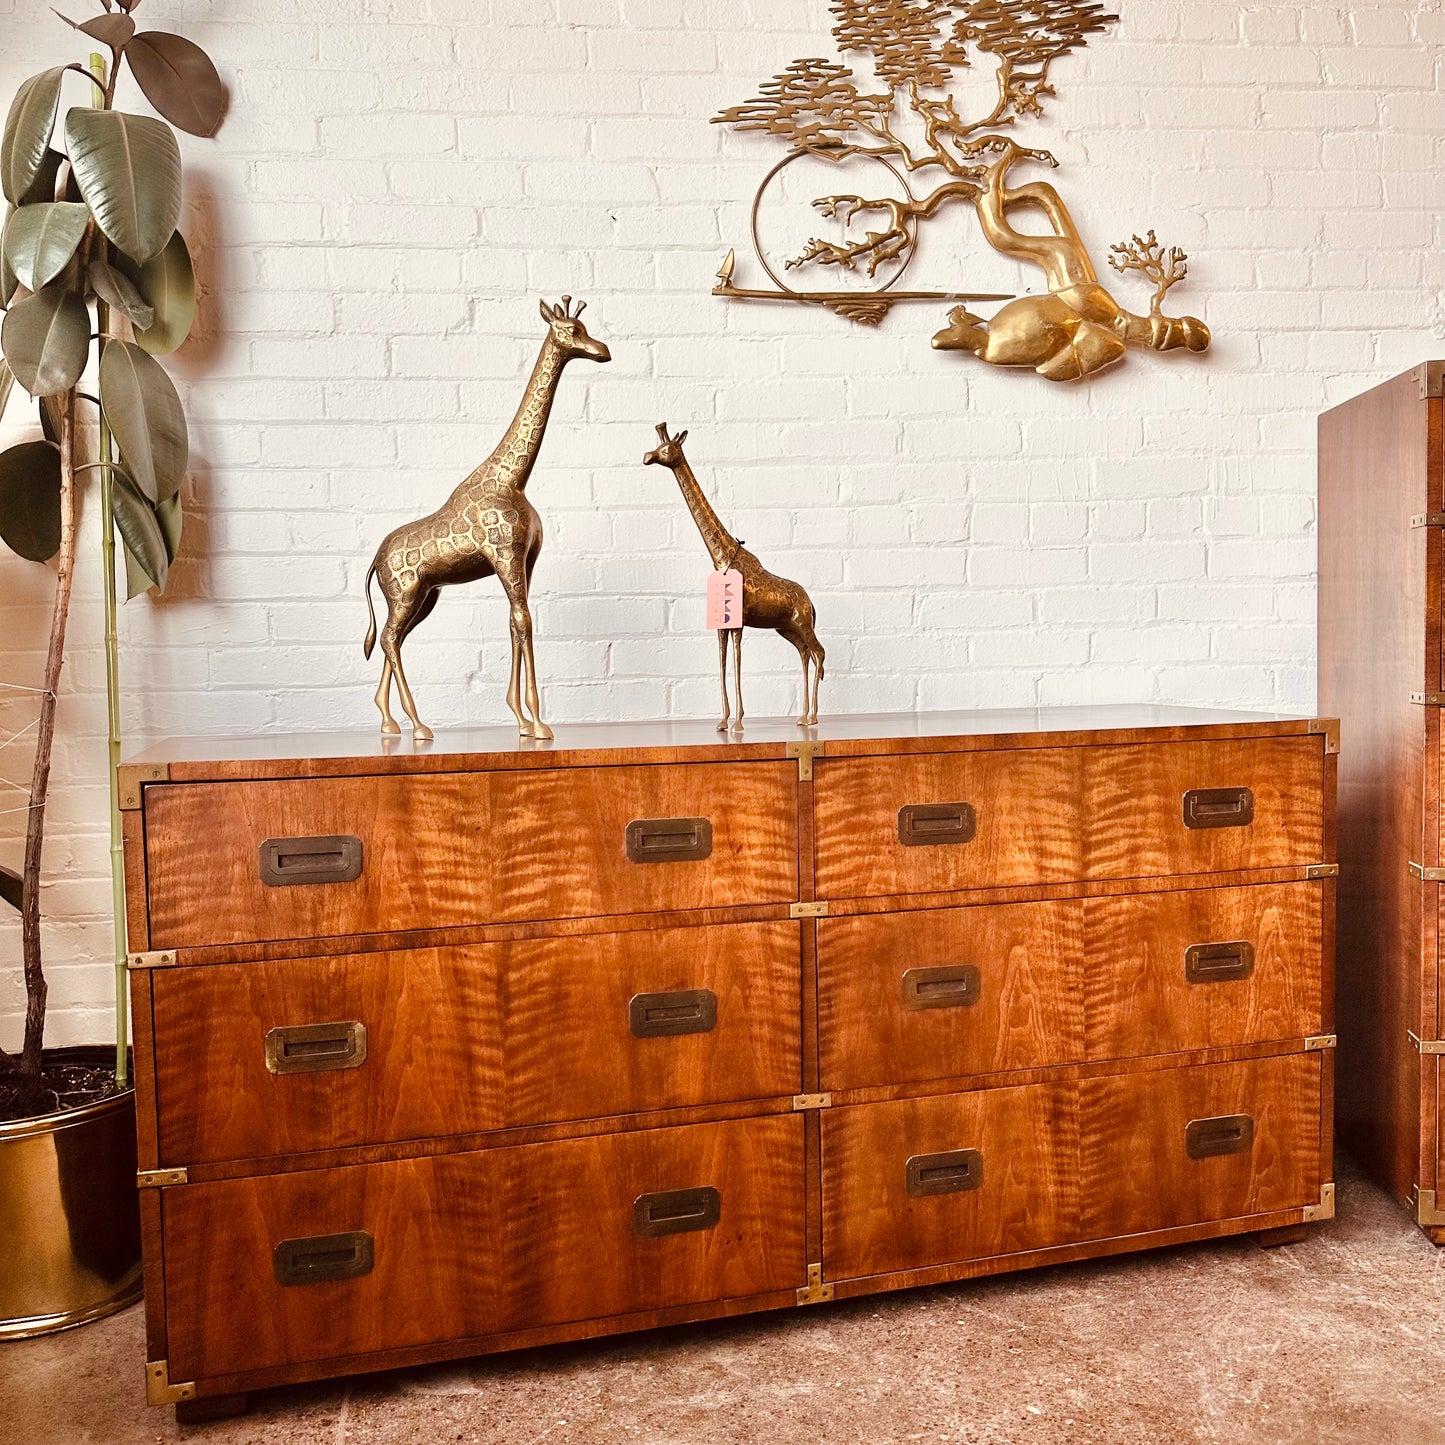 SIX DRAWER DRESSER IN HENREDON CAMPAIGN STYLE